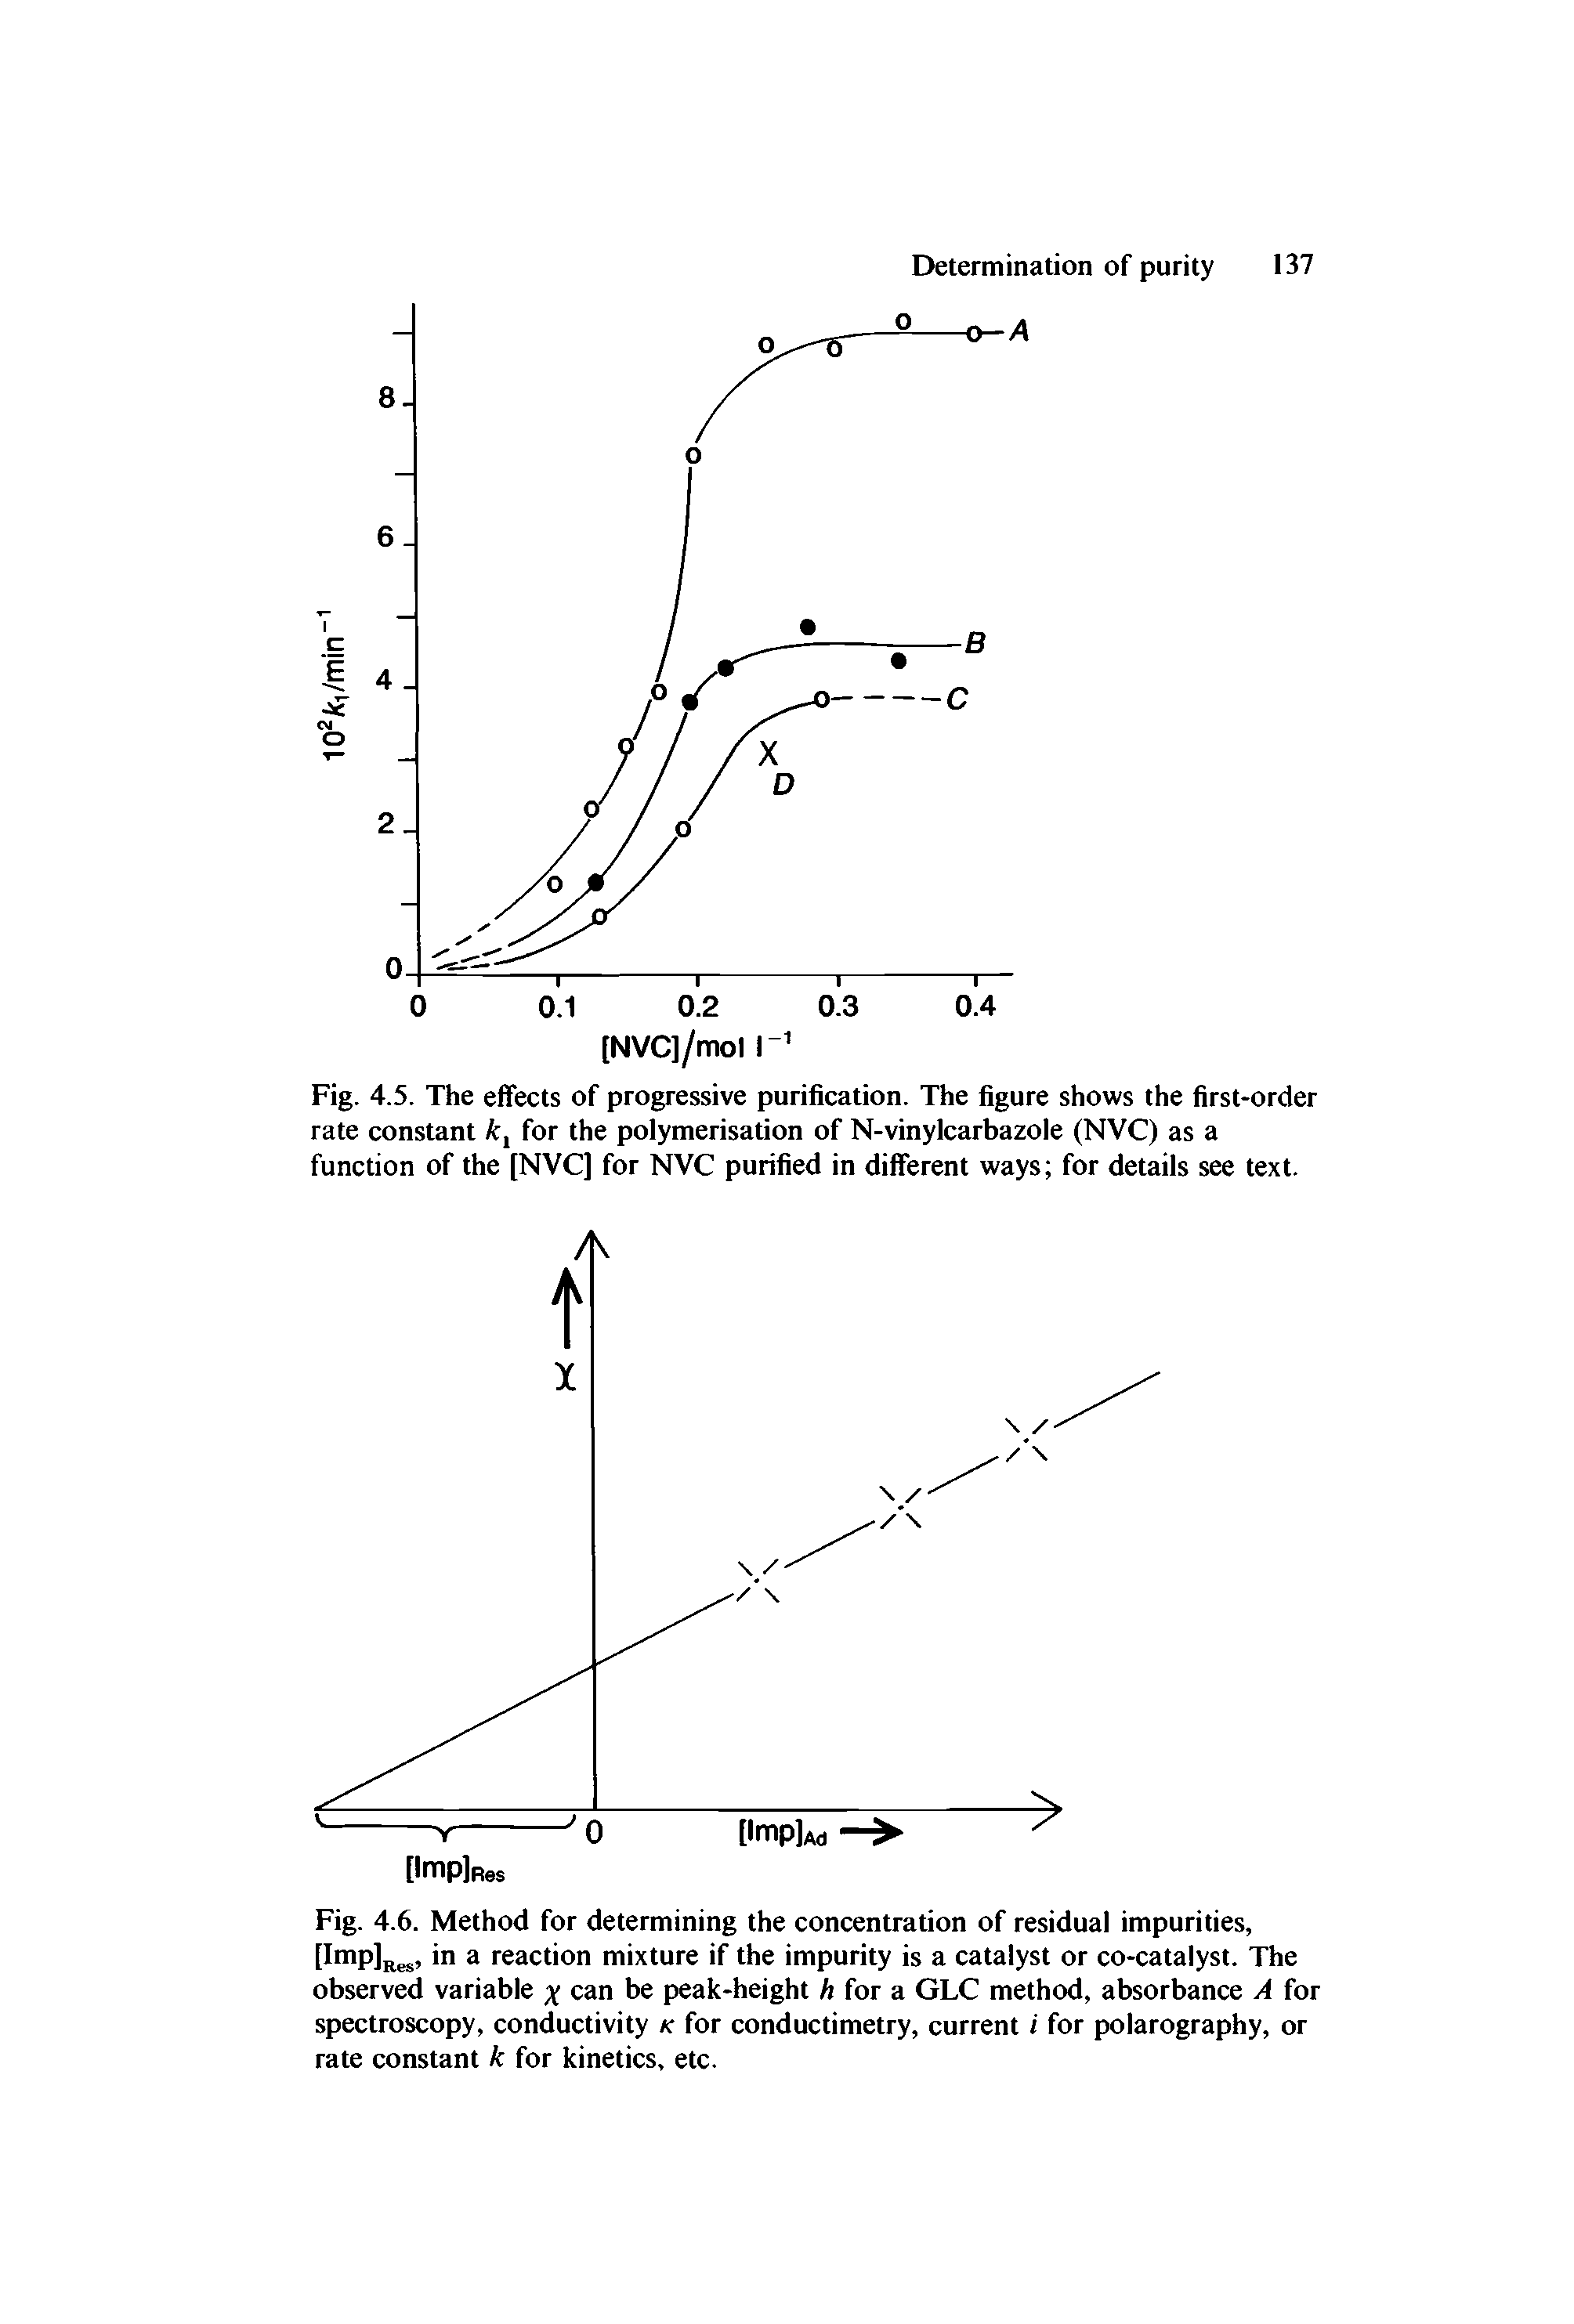 Fig. 4.6. Method for determining the concentration of residual impurities, [Impjj jjj., in a reaction mixture if the impurity is a catalyst or co-catalyst. The observed variable x can be peak-height h for a GLC method, absorbance A for spectroscopy, conductivity k for conductimetry, current i for polarography, or rate constant k for kinetics, etc.